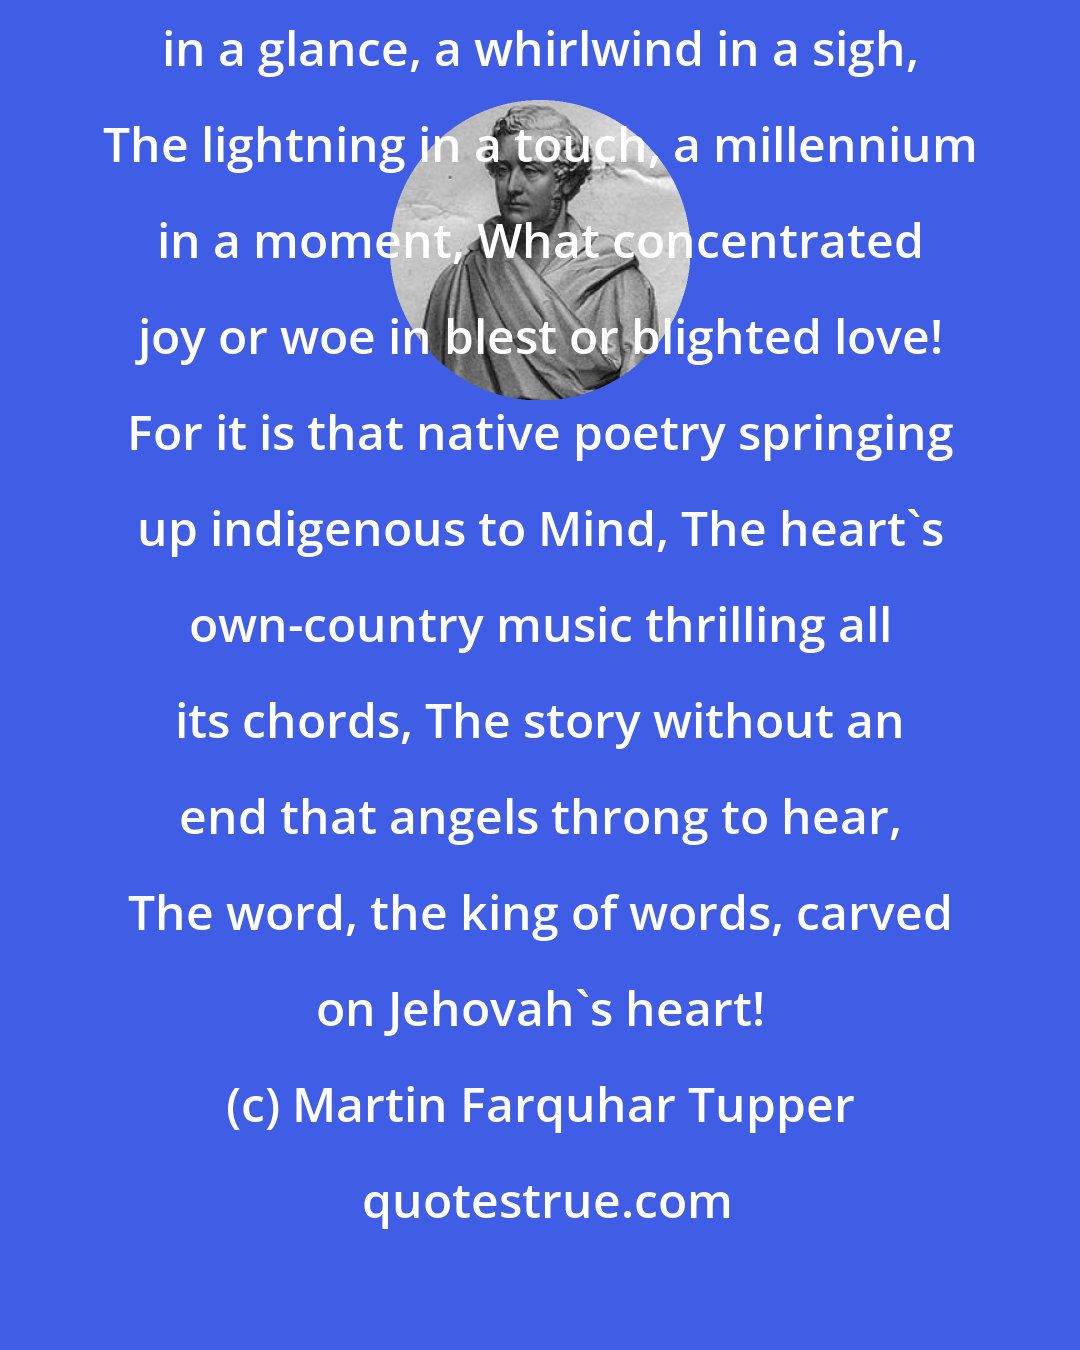 Martin Farquhar Tupper: Love--what a volume in a word, an ocean in a tear, A seventh heaven in a glance, a whirlwind in a sigh, The lightning in a touch, a millennium in a moment, What concentrated joy or woe in blest or blighted love! For it is that native poetry springing up indigenous to Mind, The heart's own-country music thrilling all its chords, The story without an end that angels throng to hear, The word, the king of words, carved on Jehovah's heart!